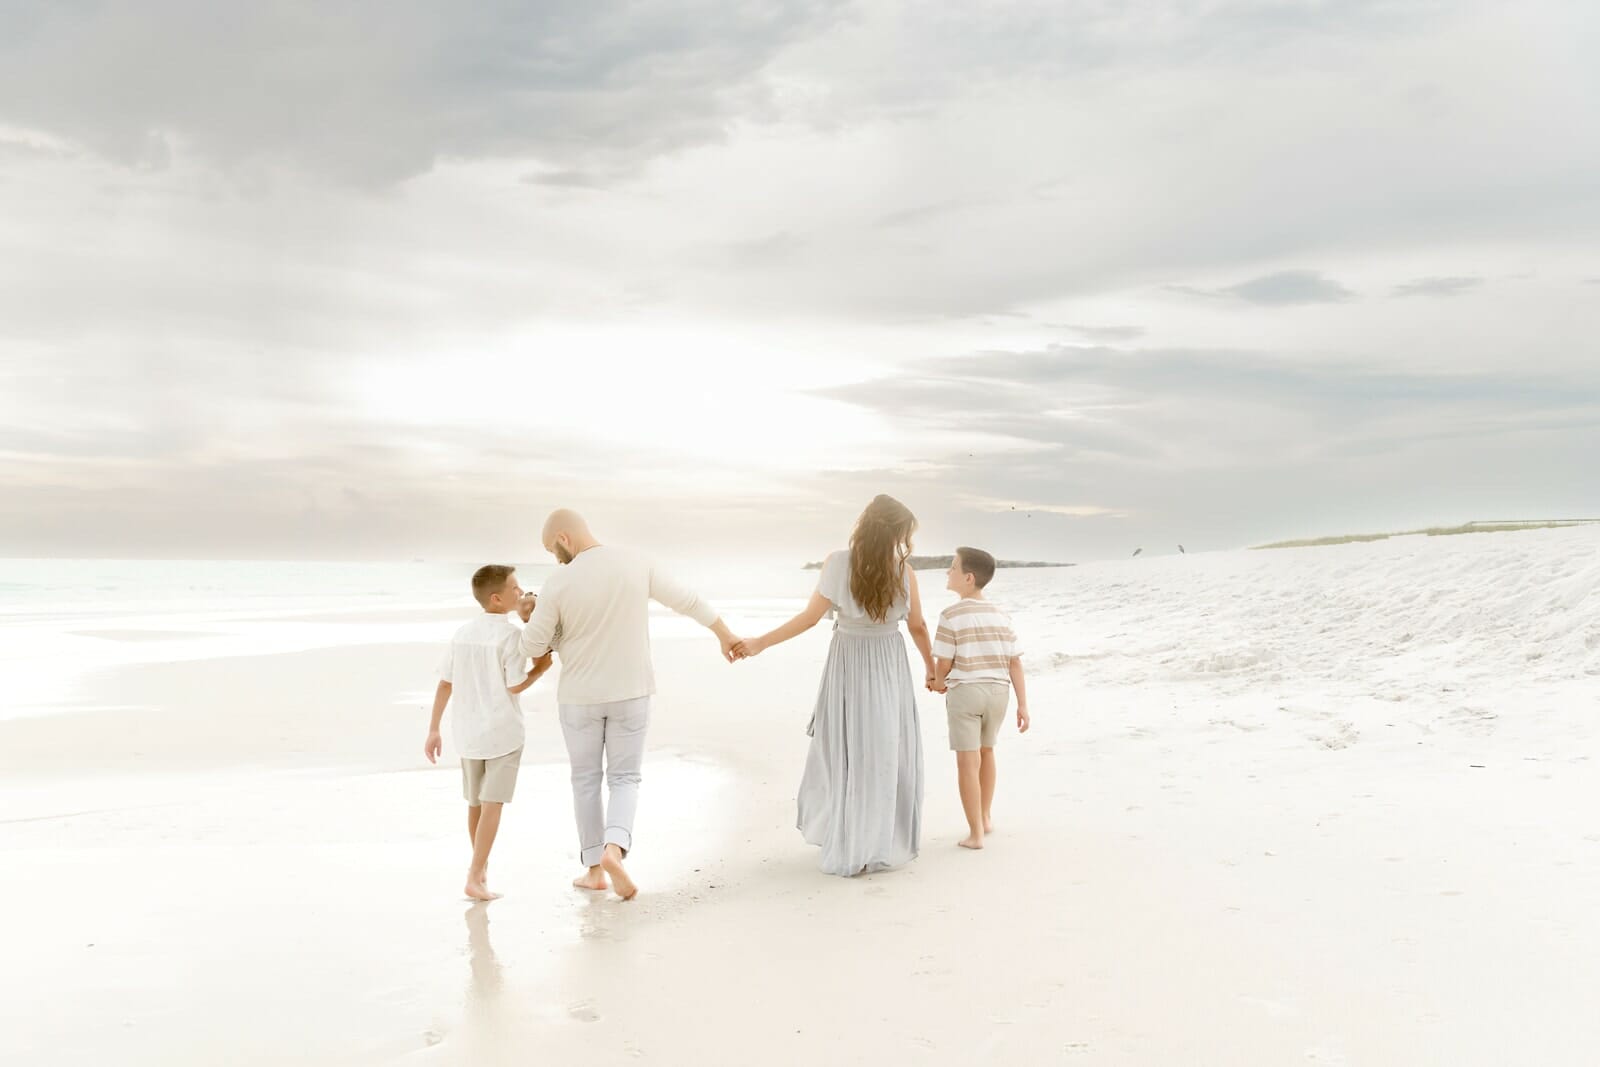 A family walking on the beach holding hands.